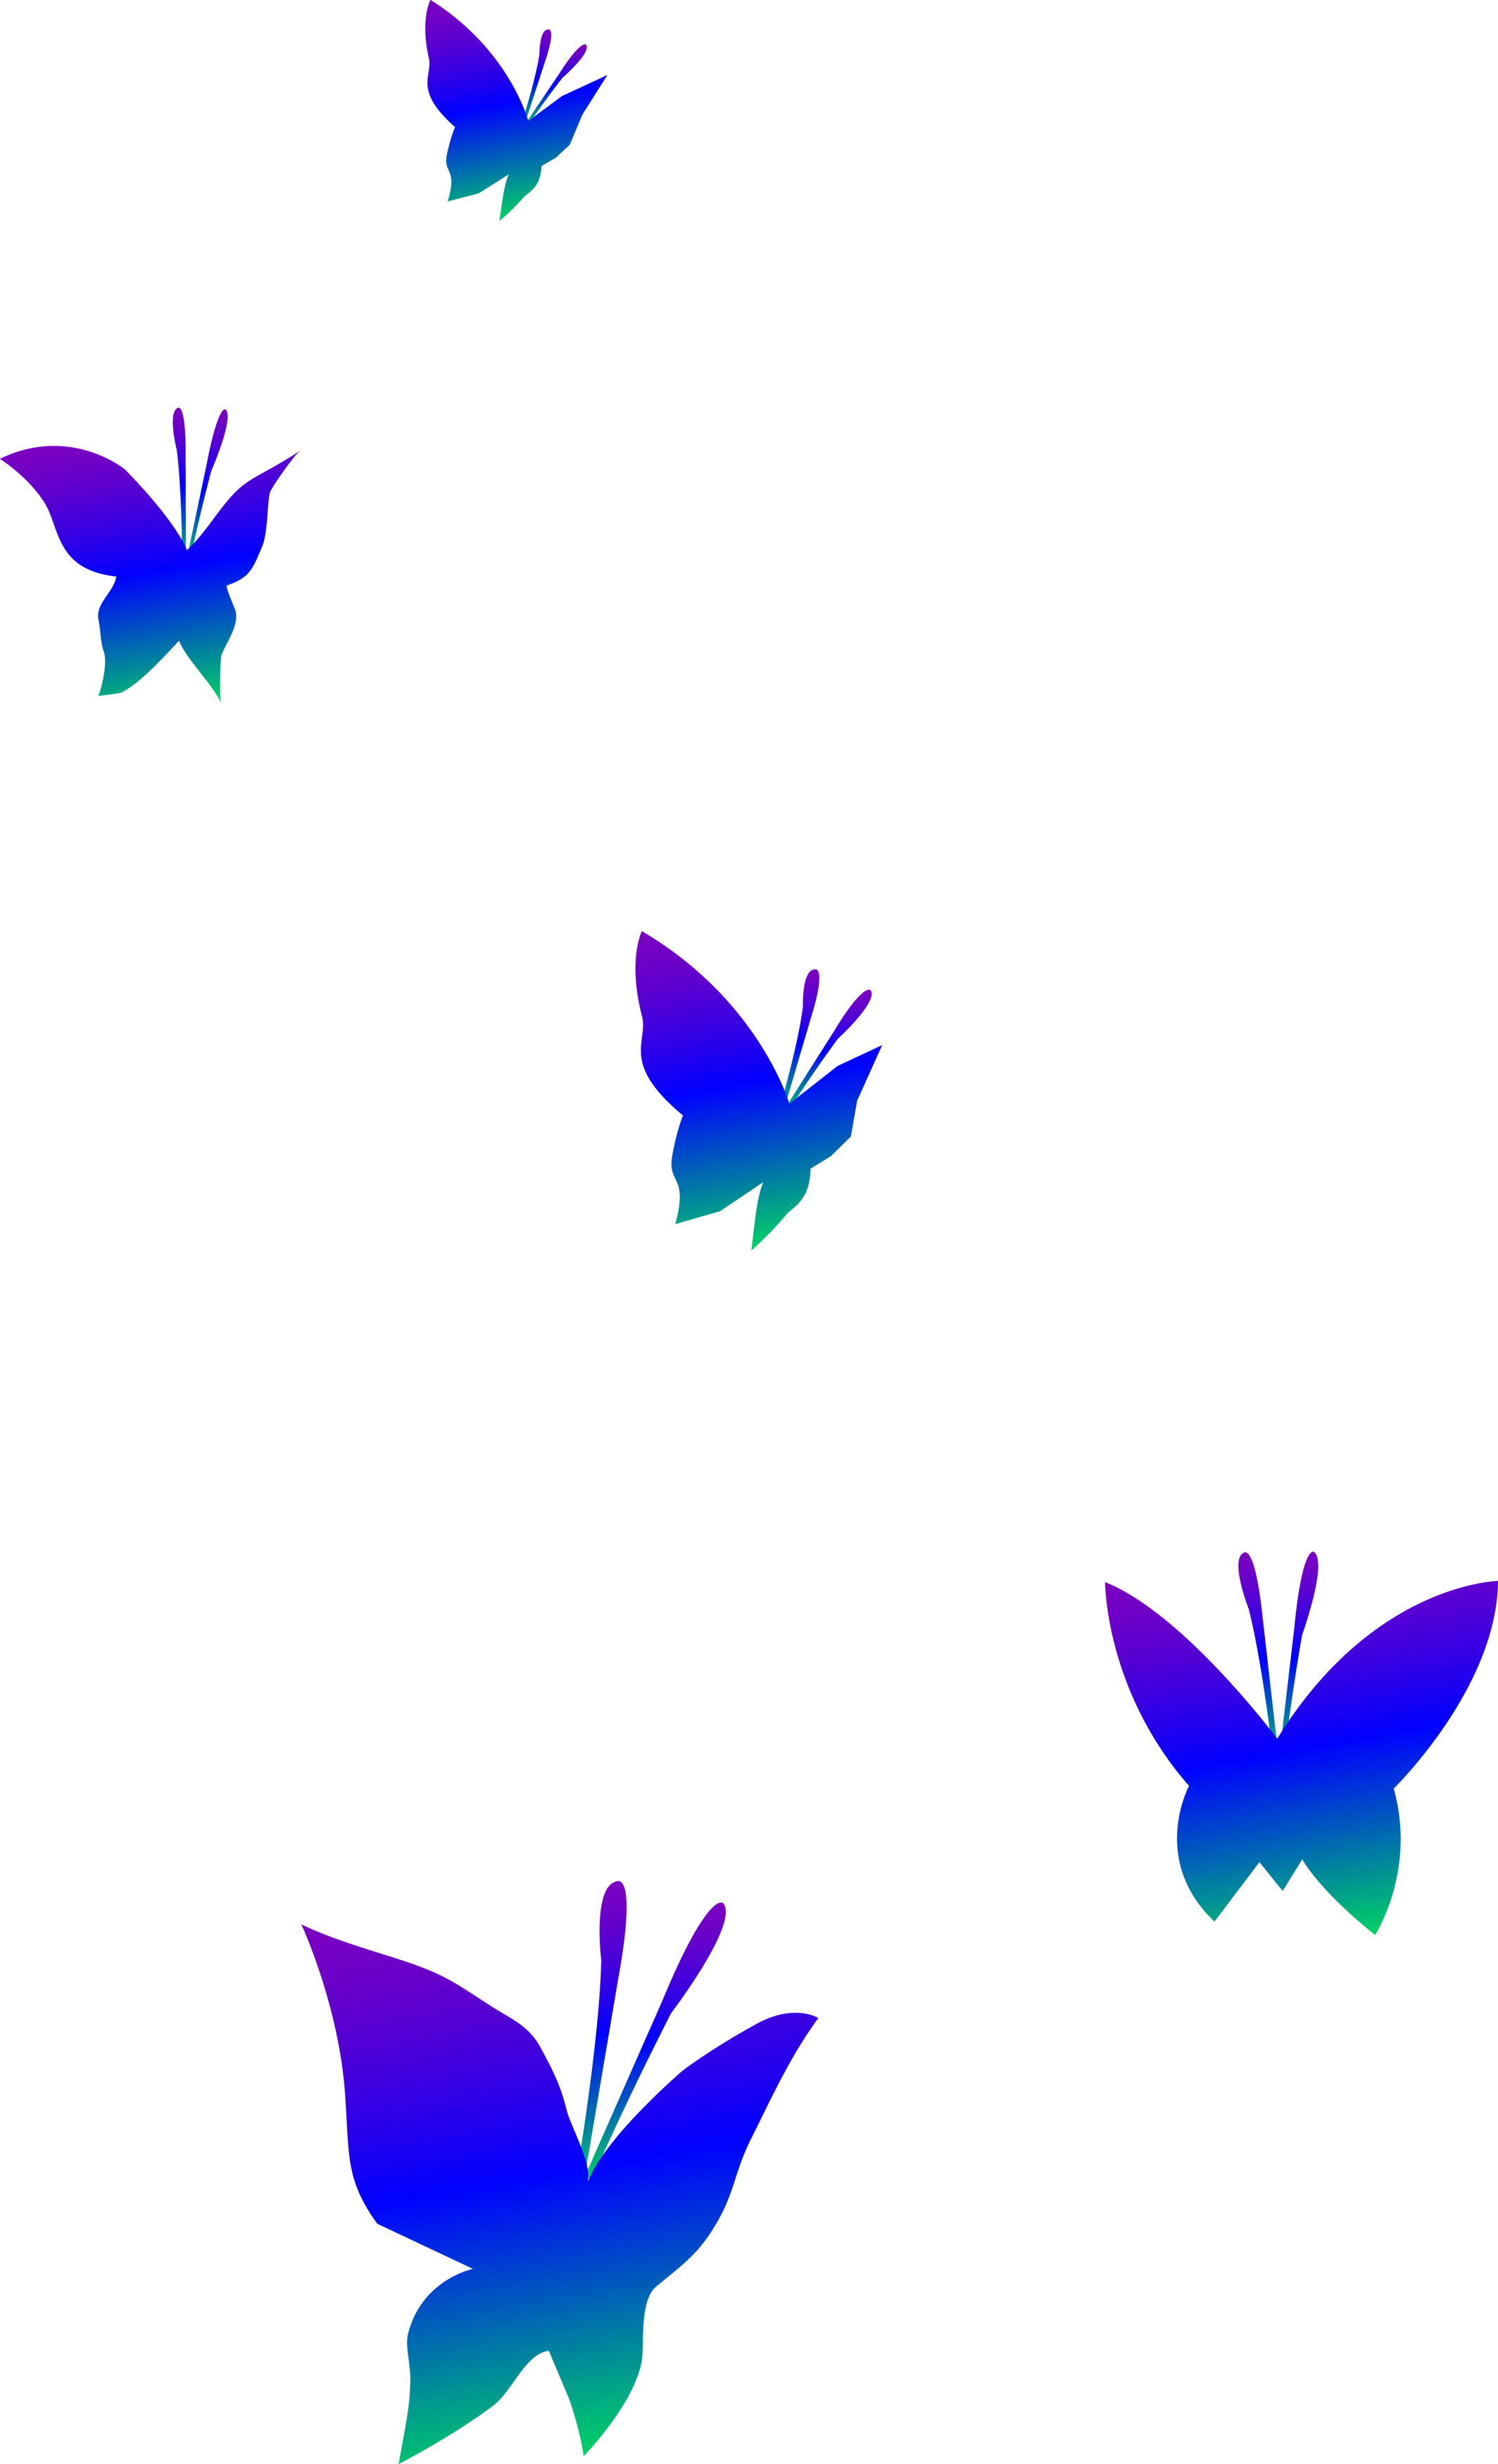 Border panda free images. Insect clipart colorful flying butterfly